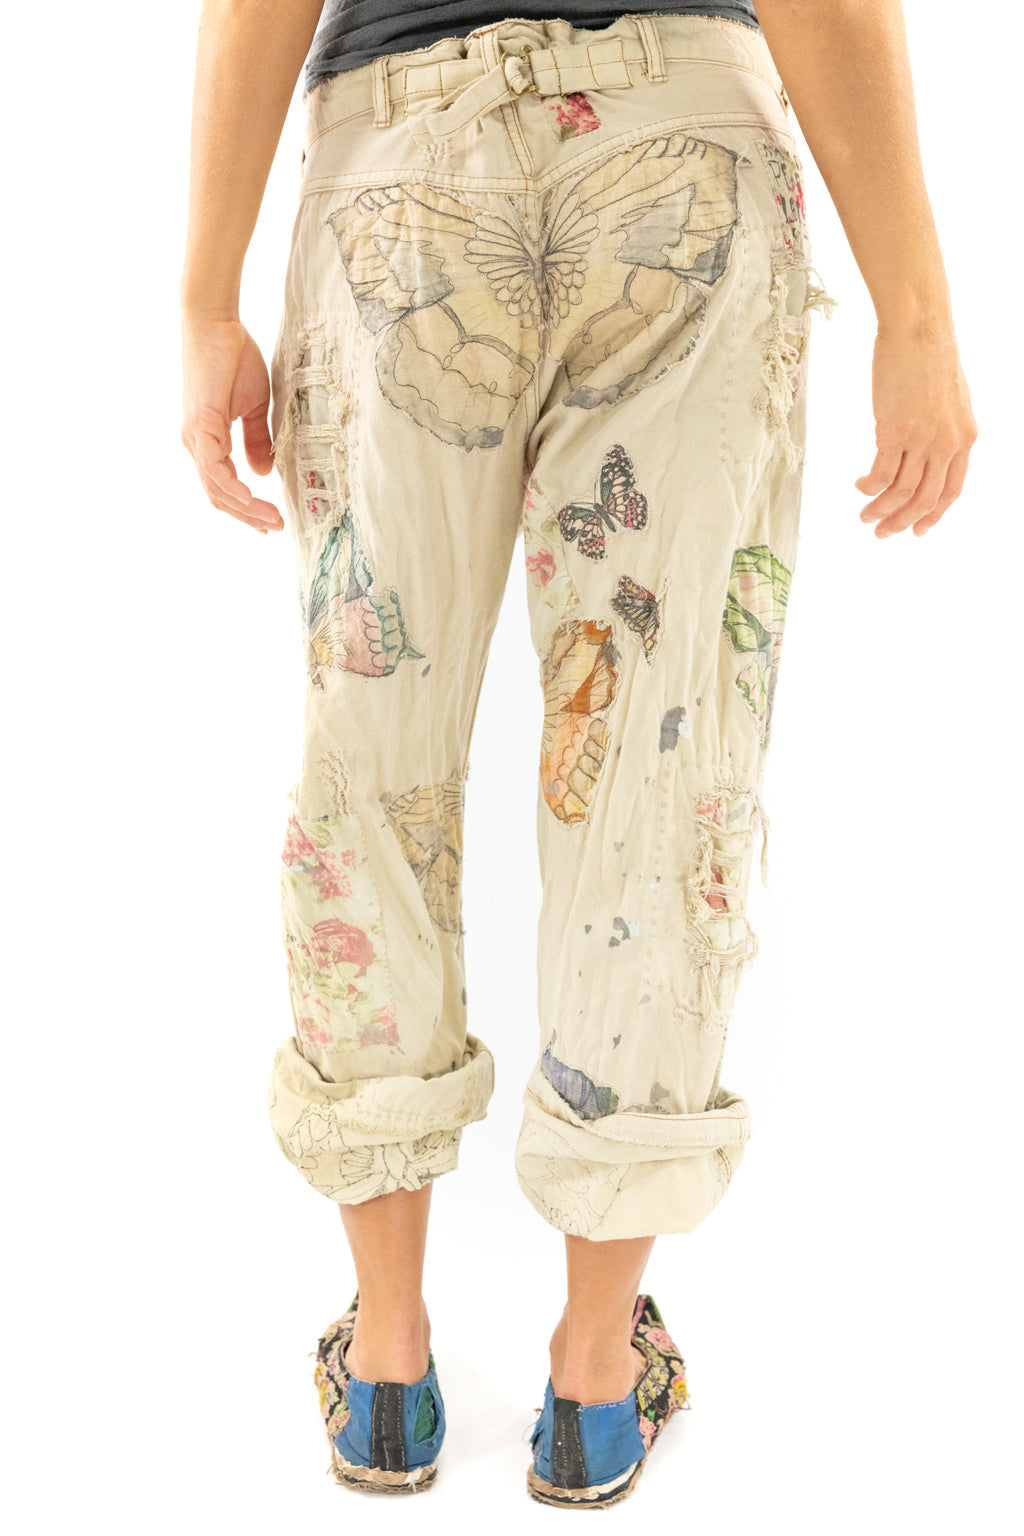 Butterfly Ranchero Denims by Magnolia Pearl The Vintage Garden 